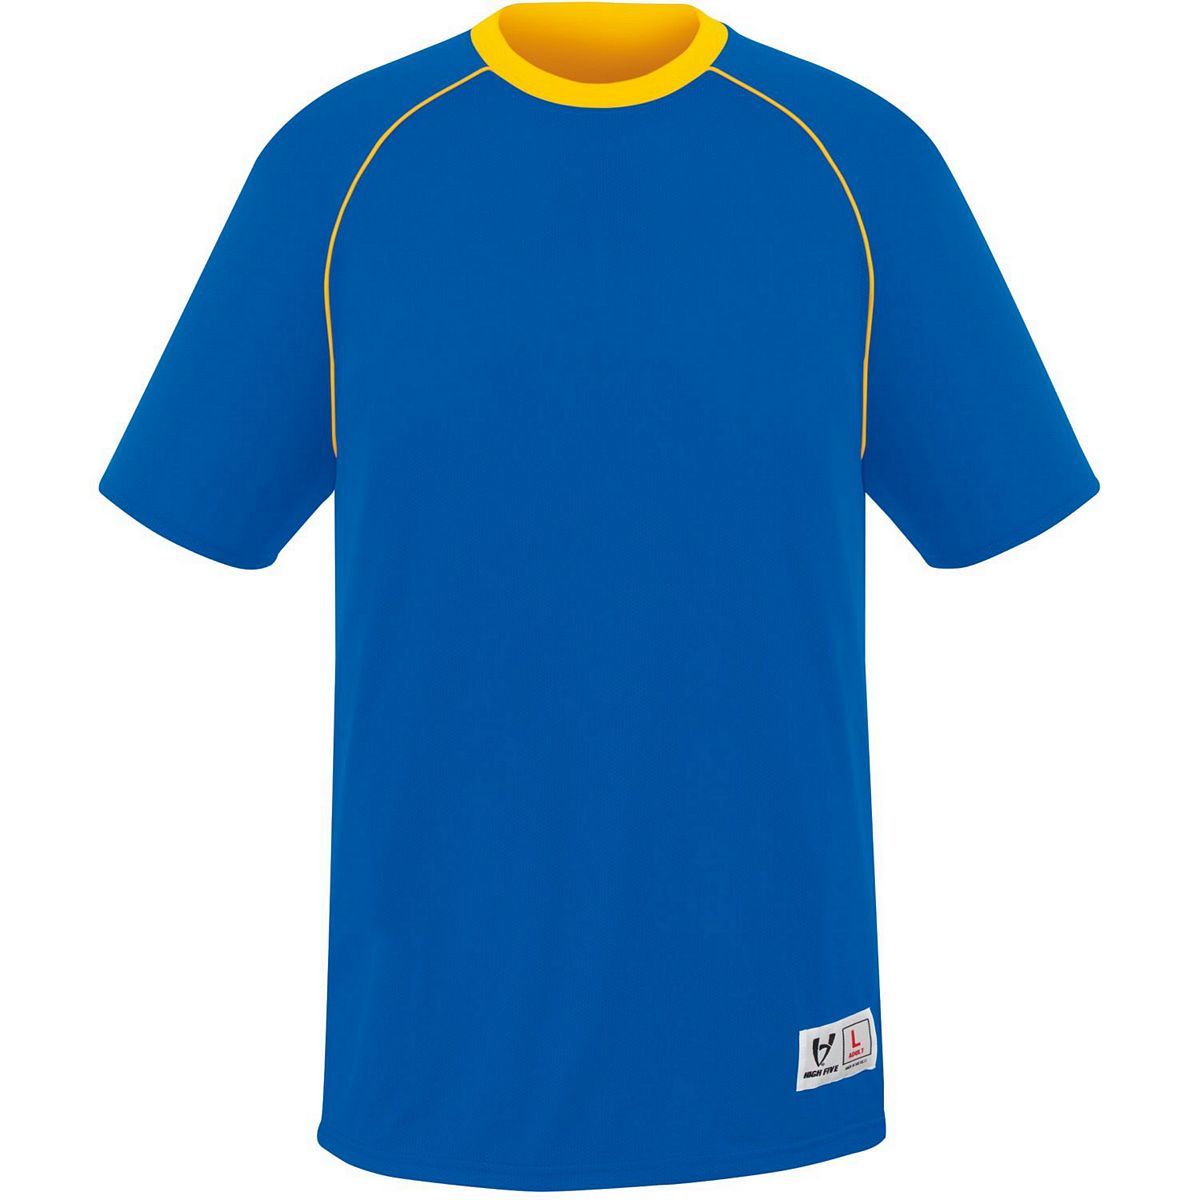 High 5 Youth Conversion Reversible Jersey in Royal/Athletic Gold  -Part of the Youth, Youth-Jersey, High5-Products, Soccer, Shirts, All-Sports-1 product lines at KanaleyCreations.com